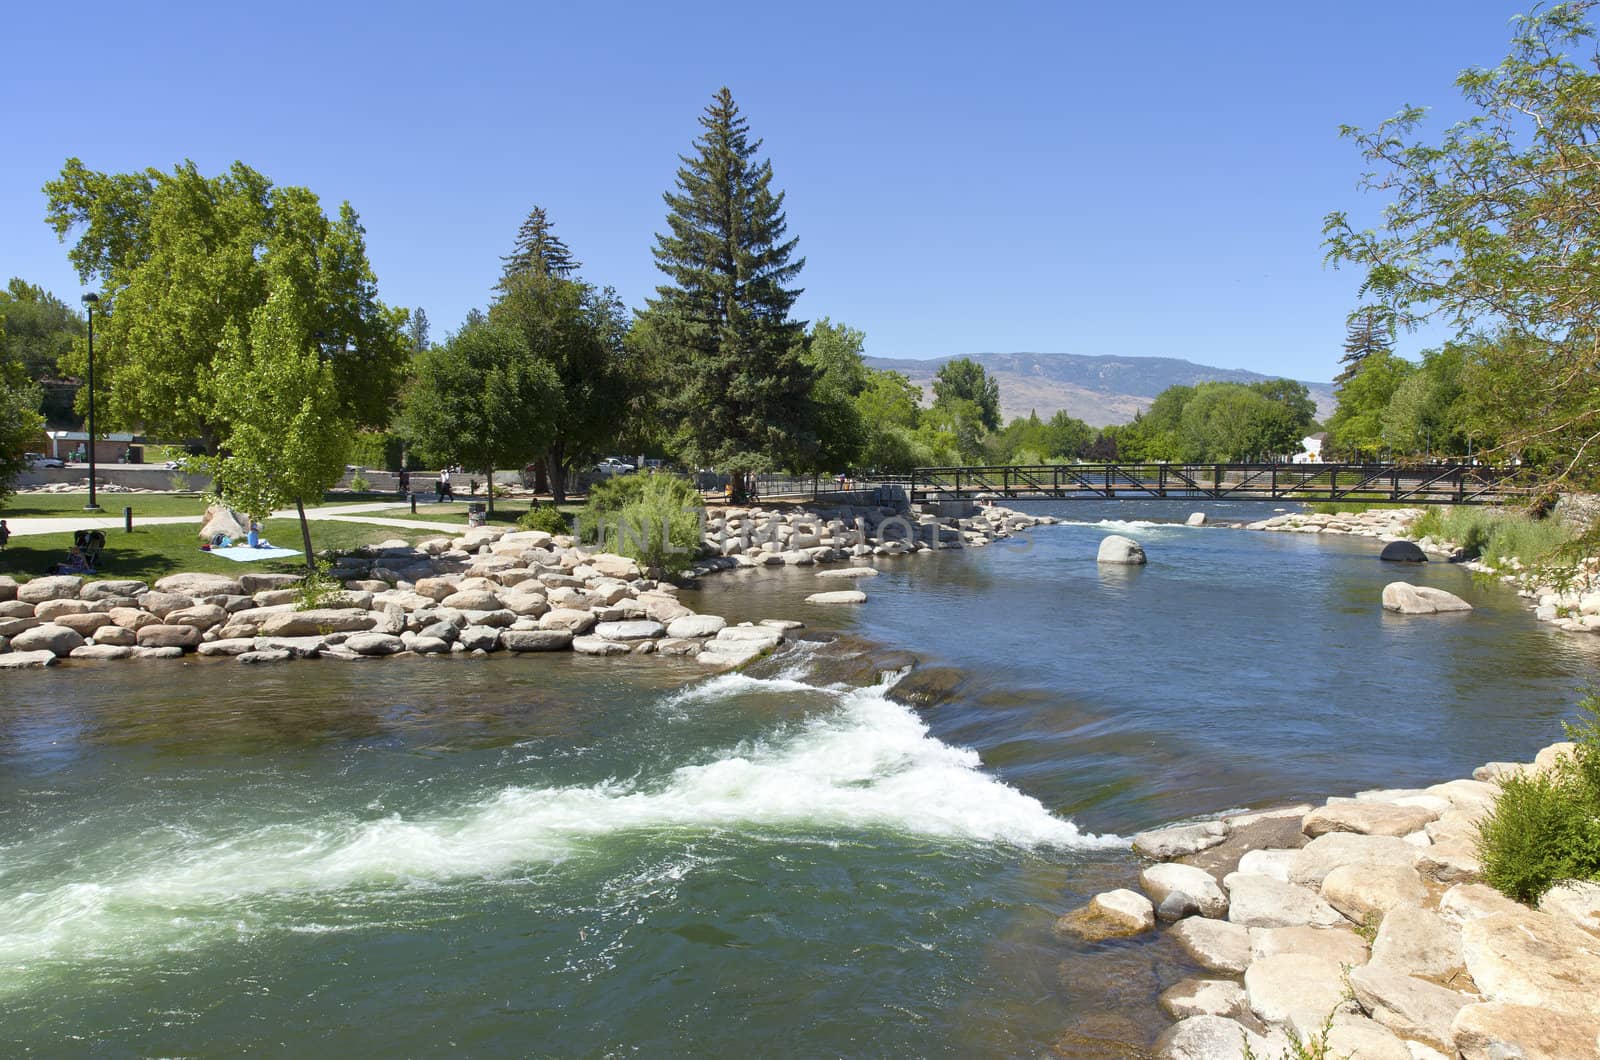 Park and river near downtown Reno, NV. by Rigucci